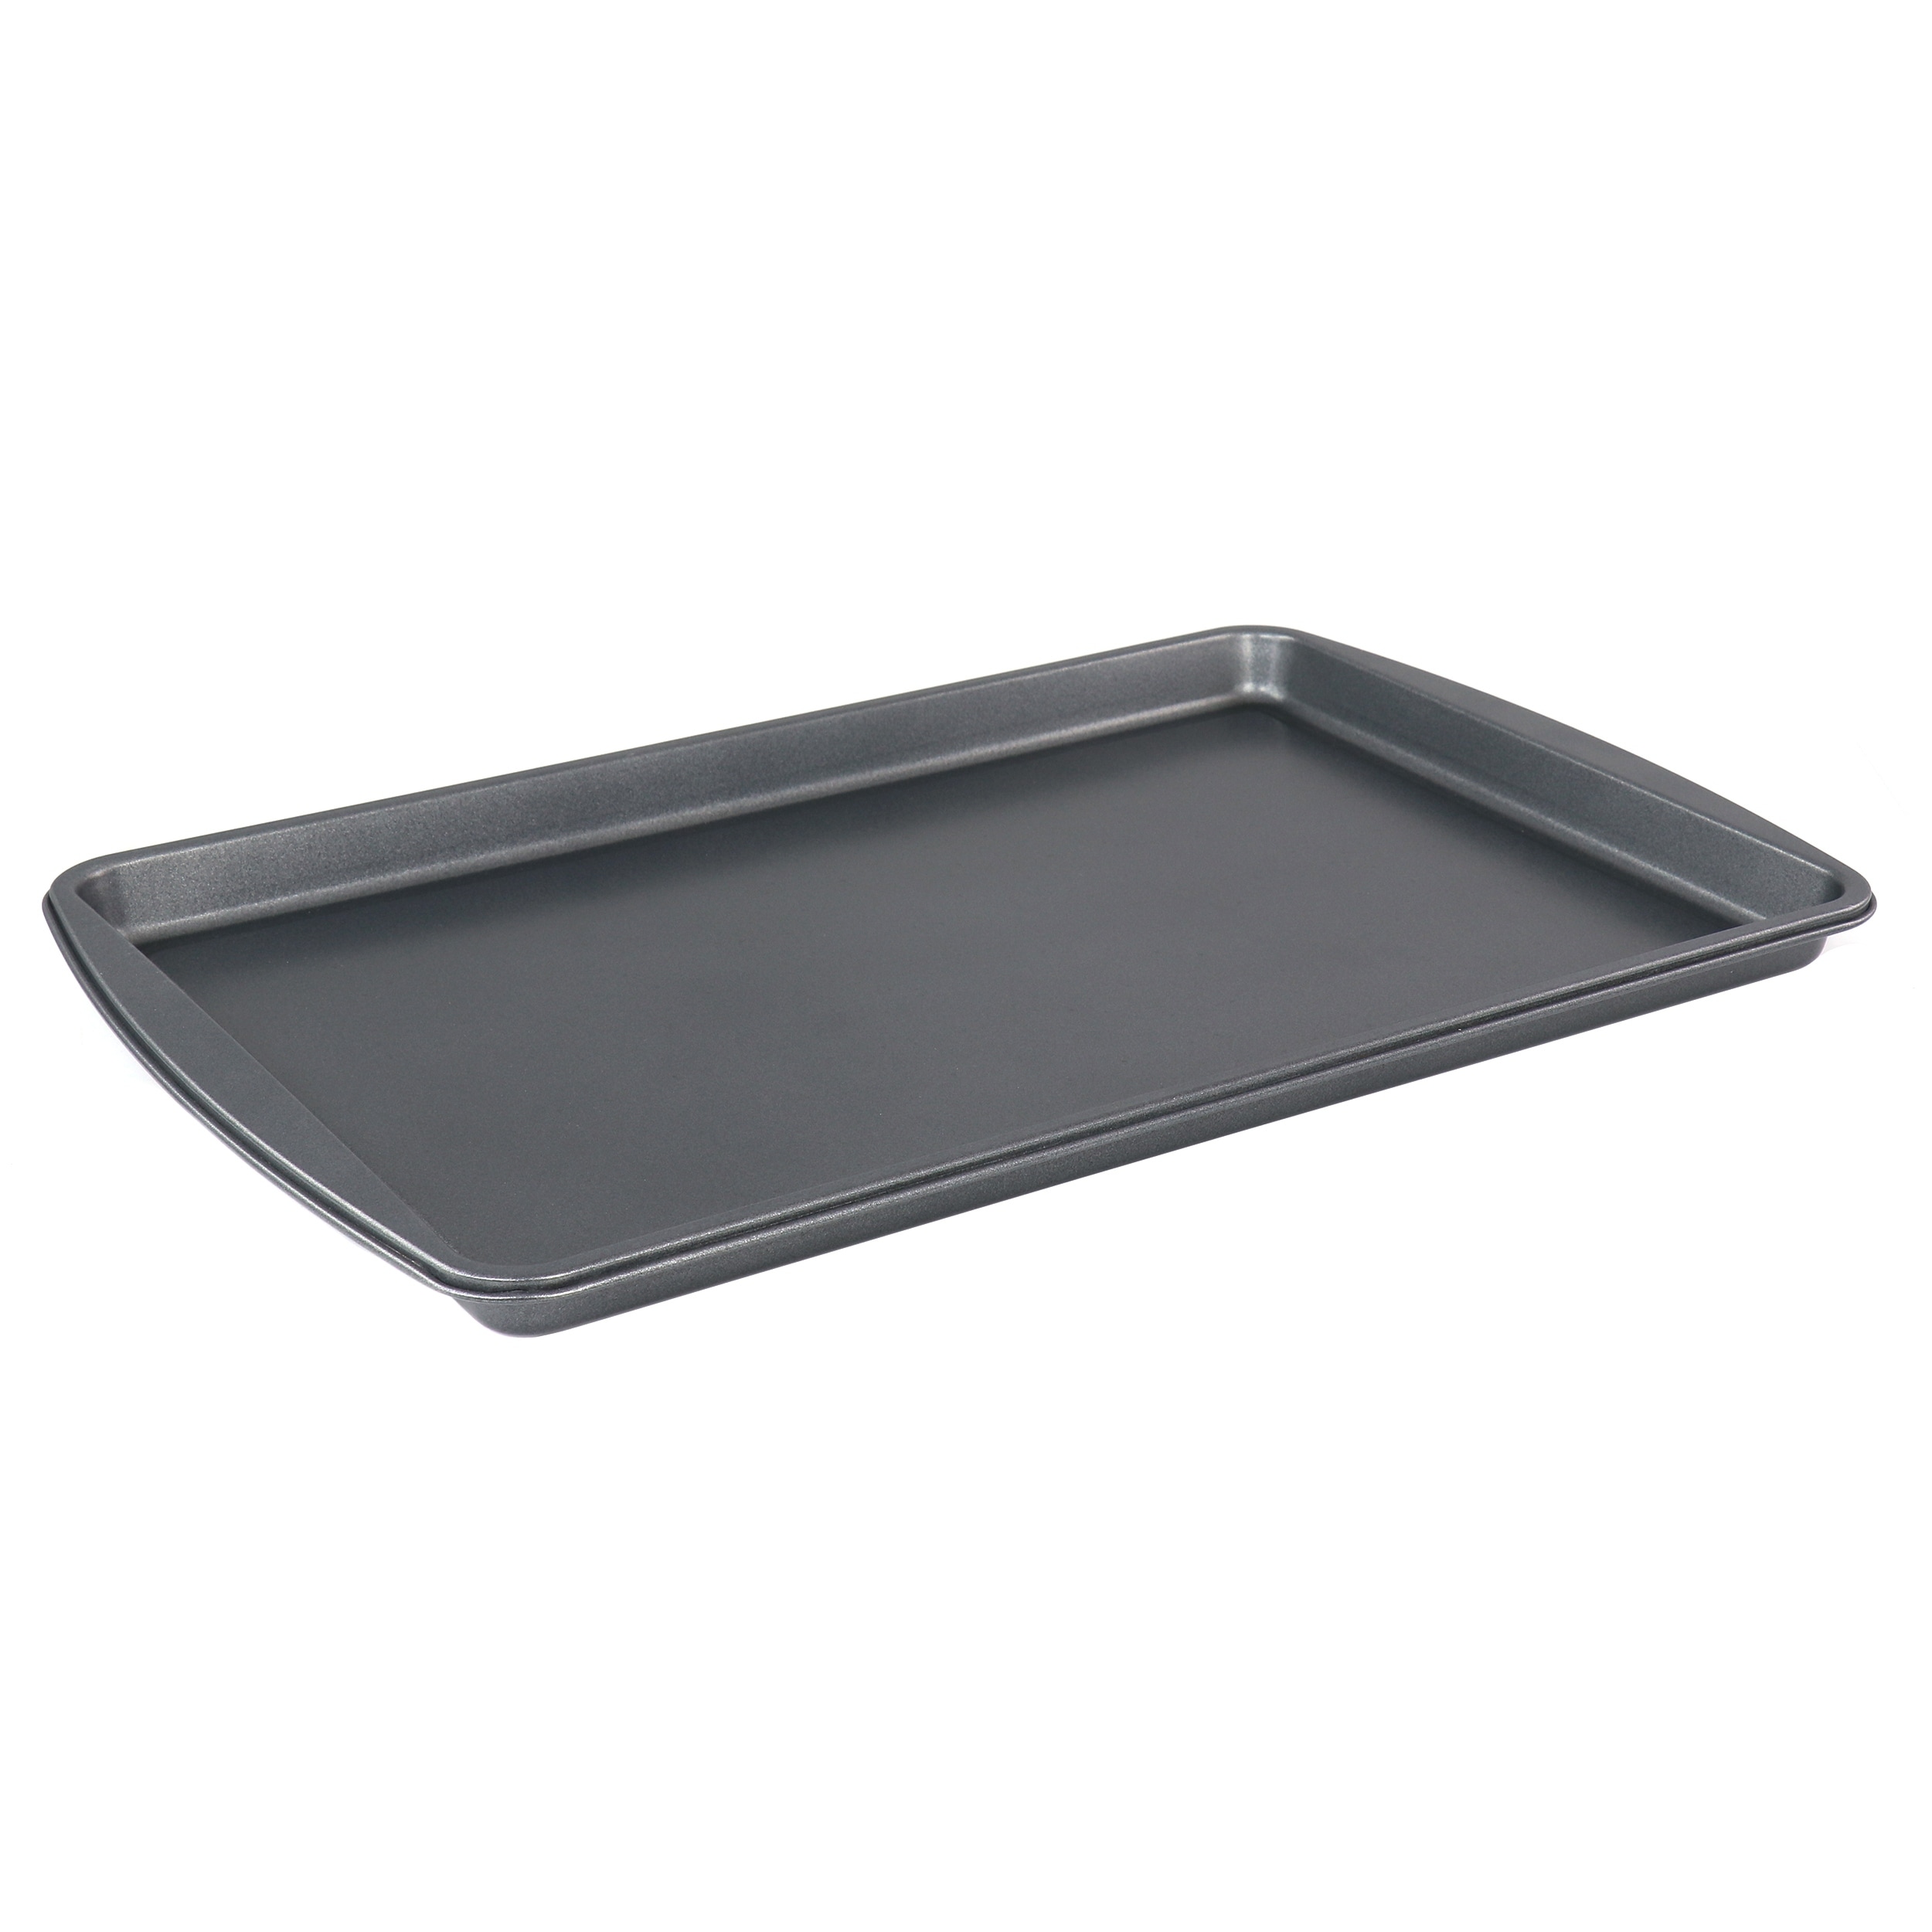 https://ak1.ostkcdn.com/images/products/is/images/direct/687ecd91bc0c7fad339f7b7bd820bf252ca82ed5/Simply-Essential-Nonstick-Rectangle-Aluminum-Baking-Sheet-Pan.jpg